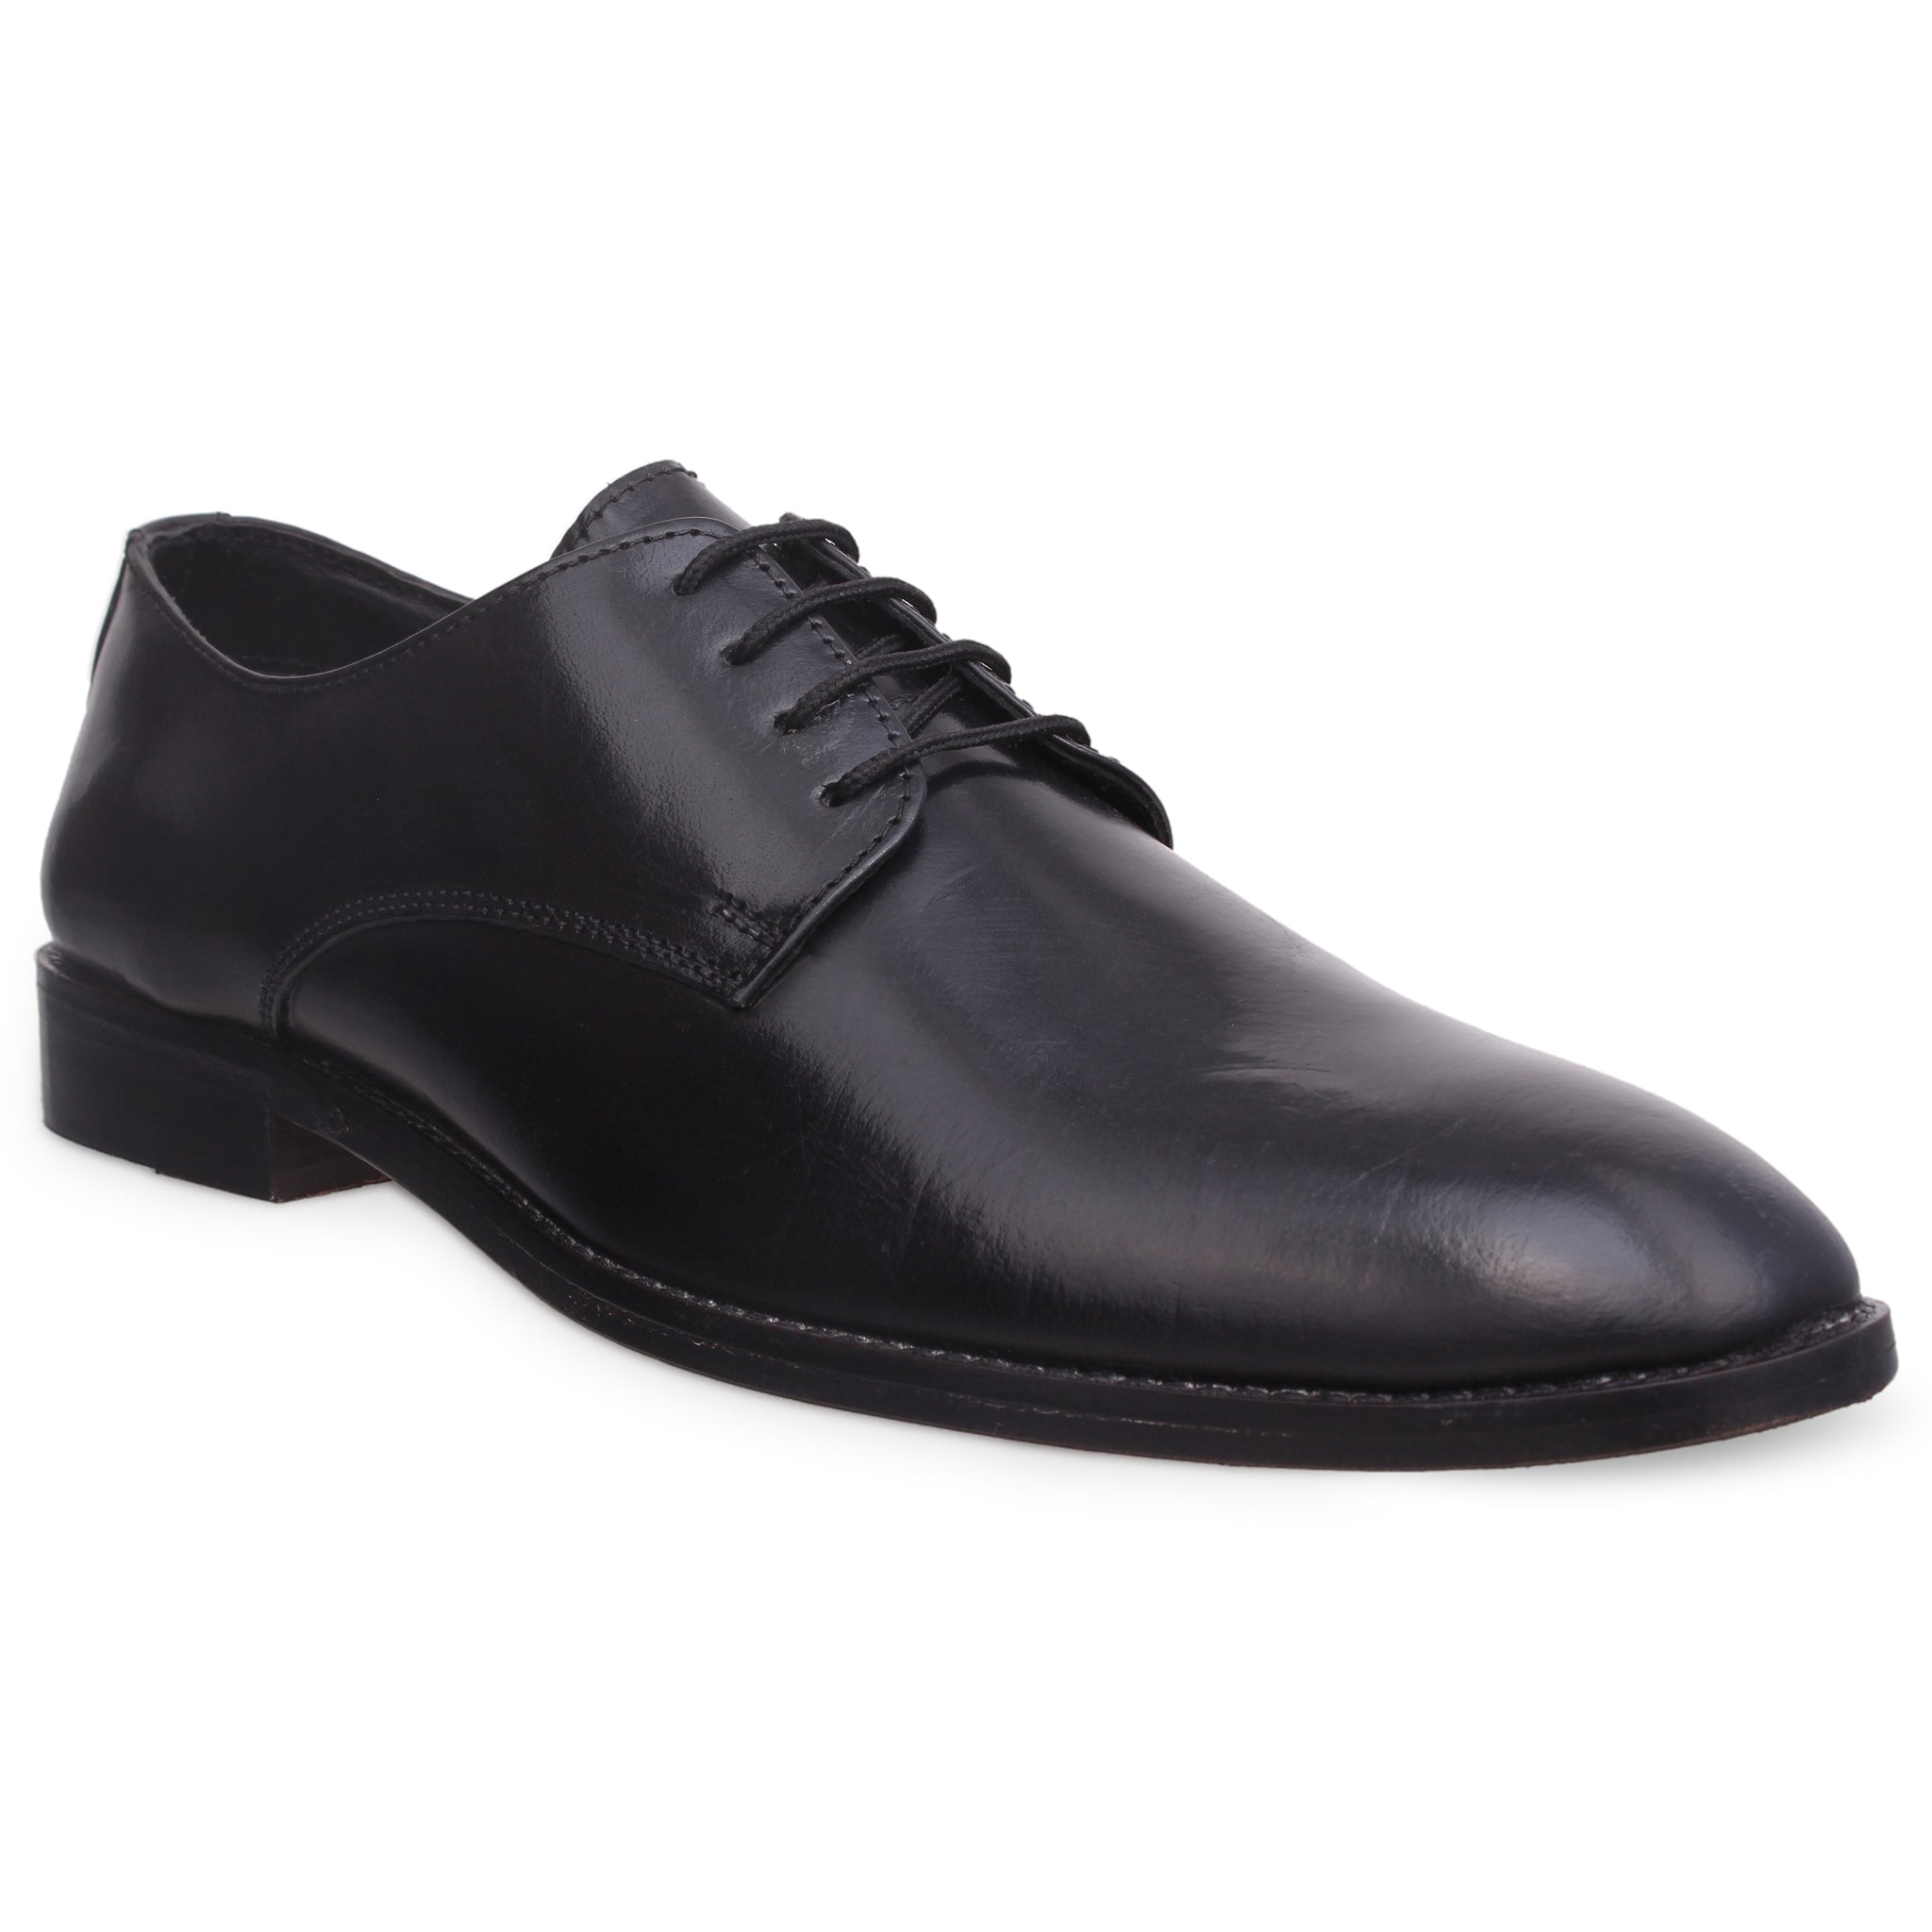 Men's formal Office Black Shoe with 4 hole laces Designed by Cotton Co ...